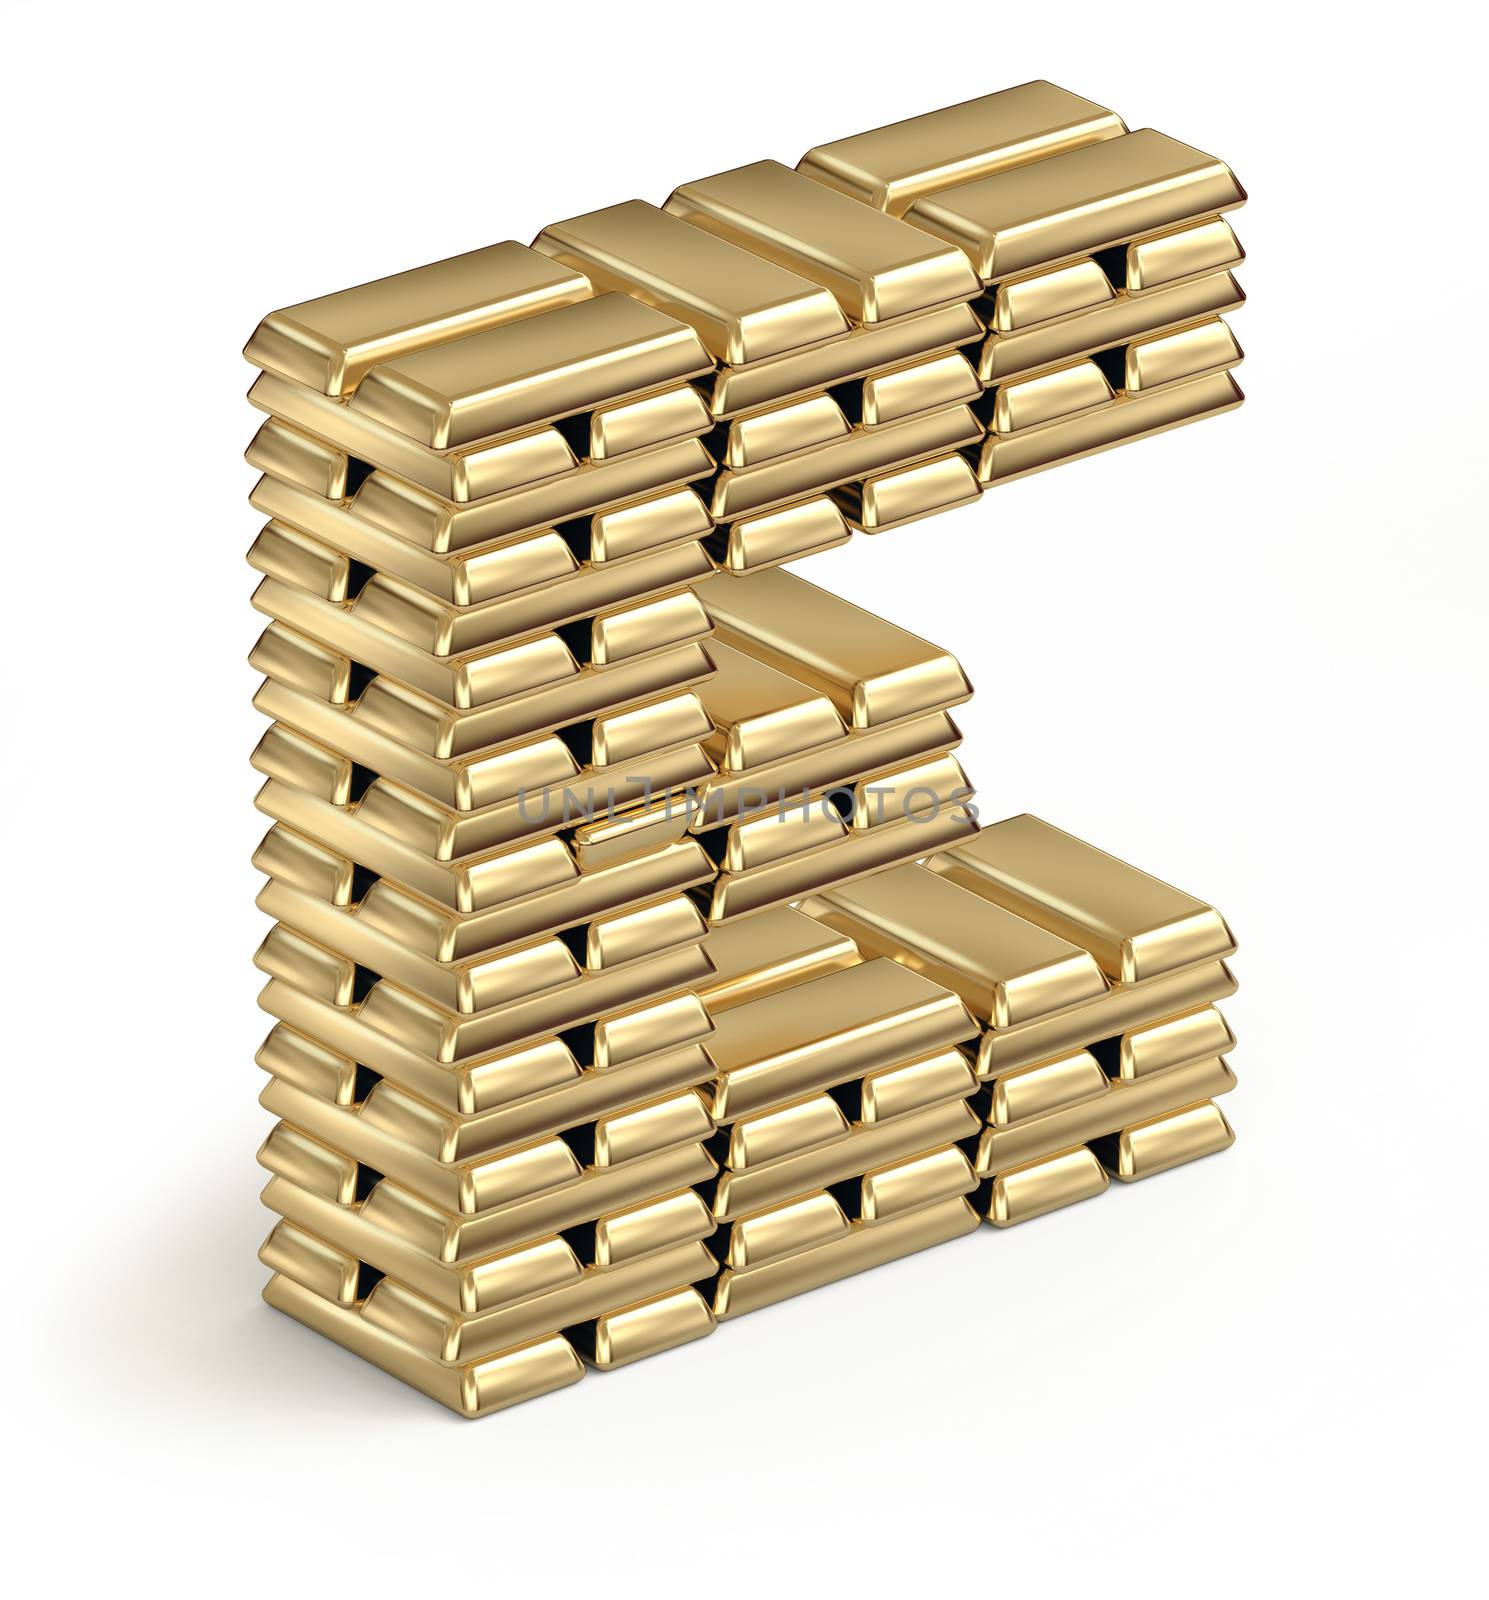 Letter E from stacked gold bars 3d in isometric on white background